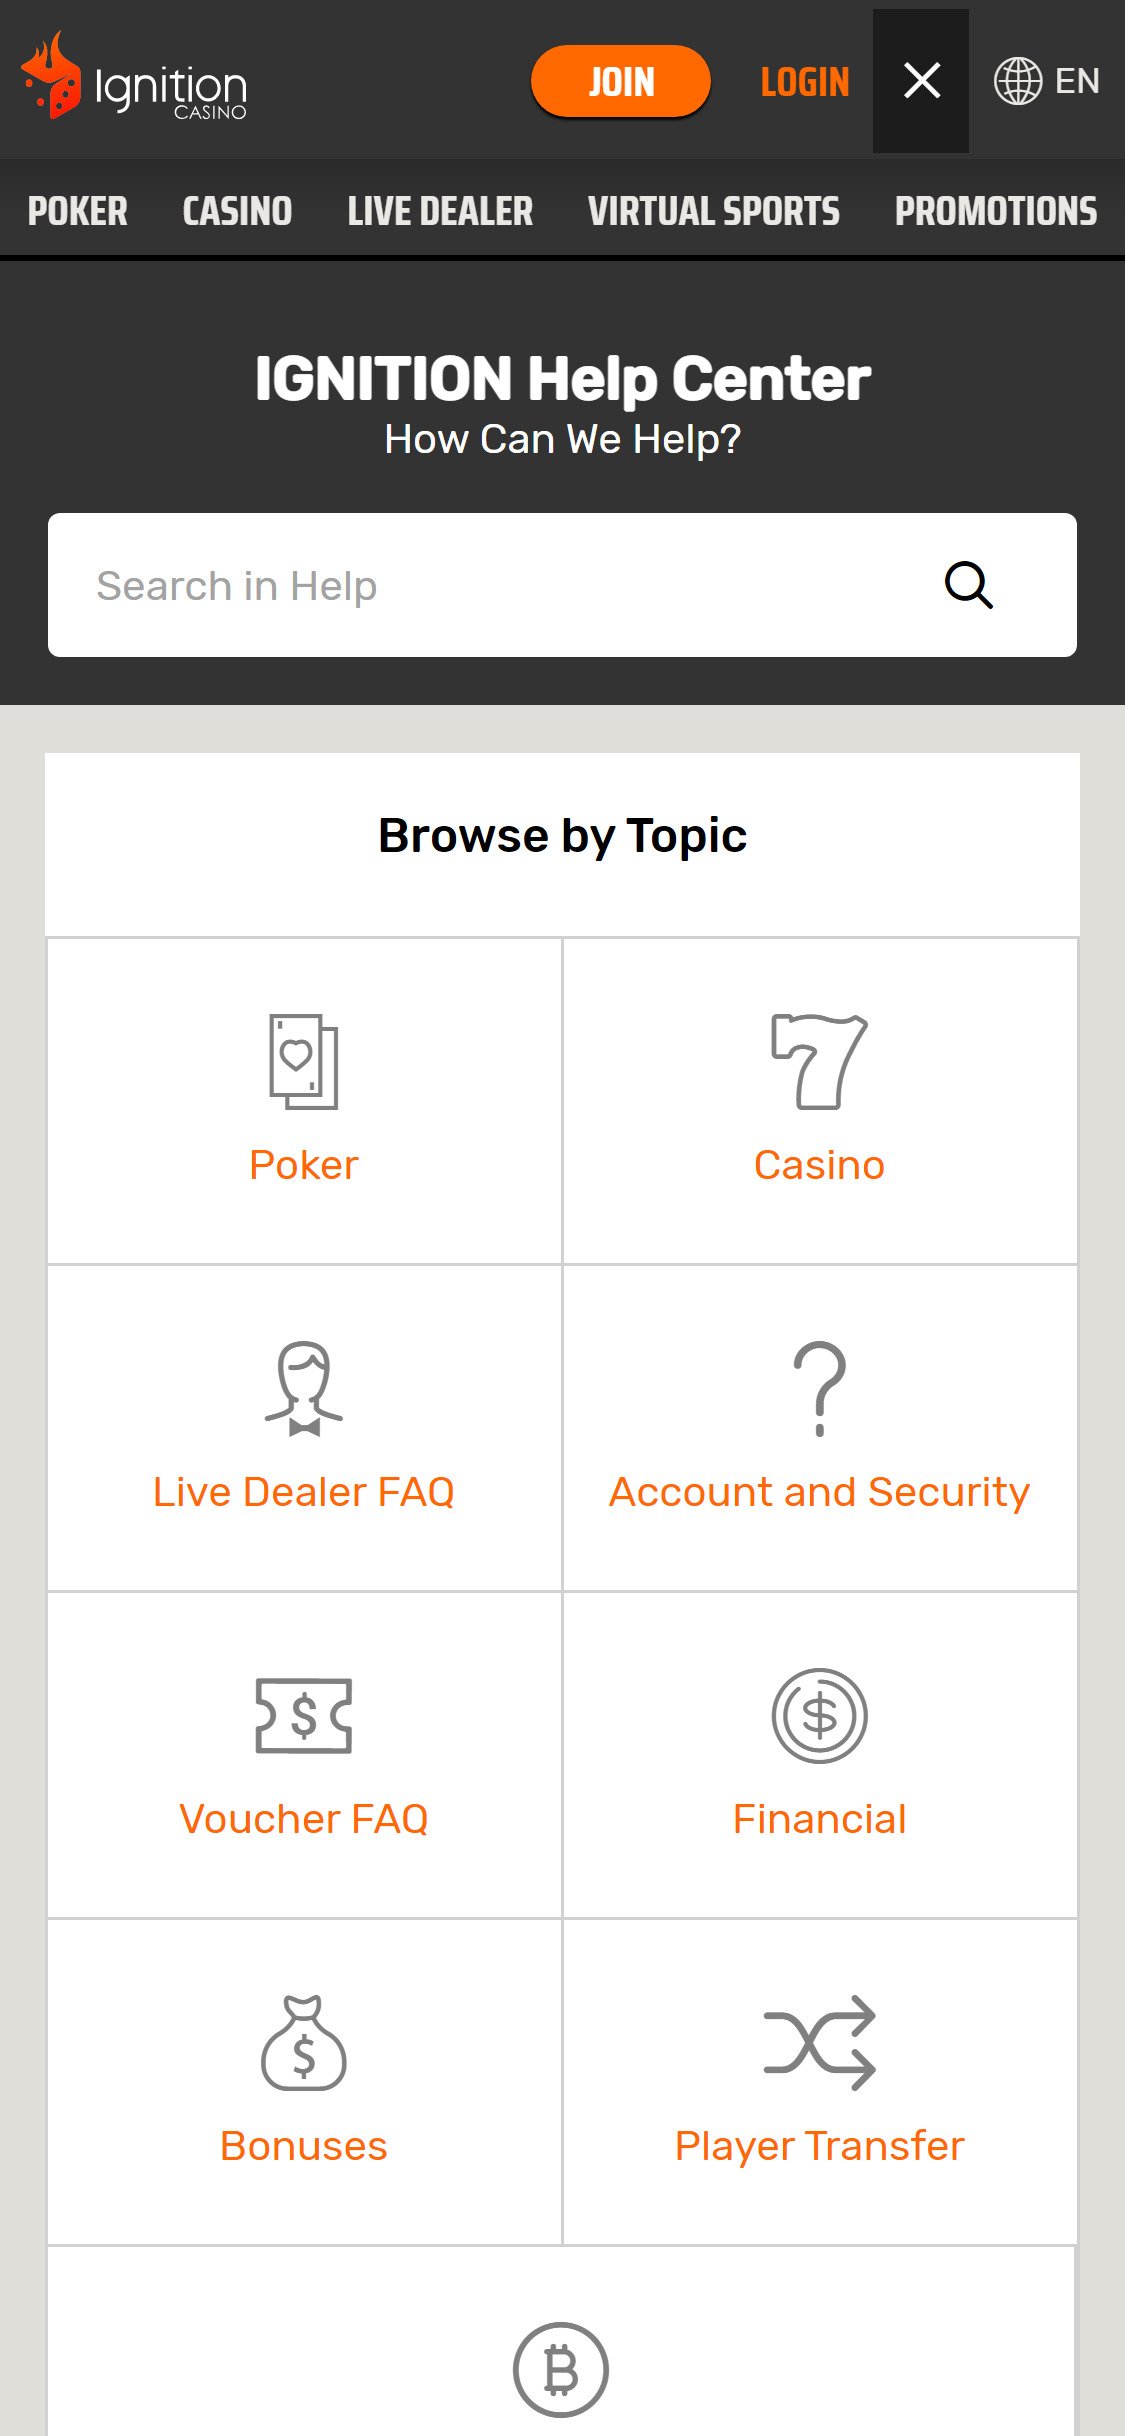 Ignition Casino Mobile Support Review